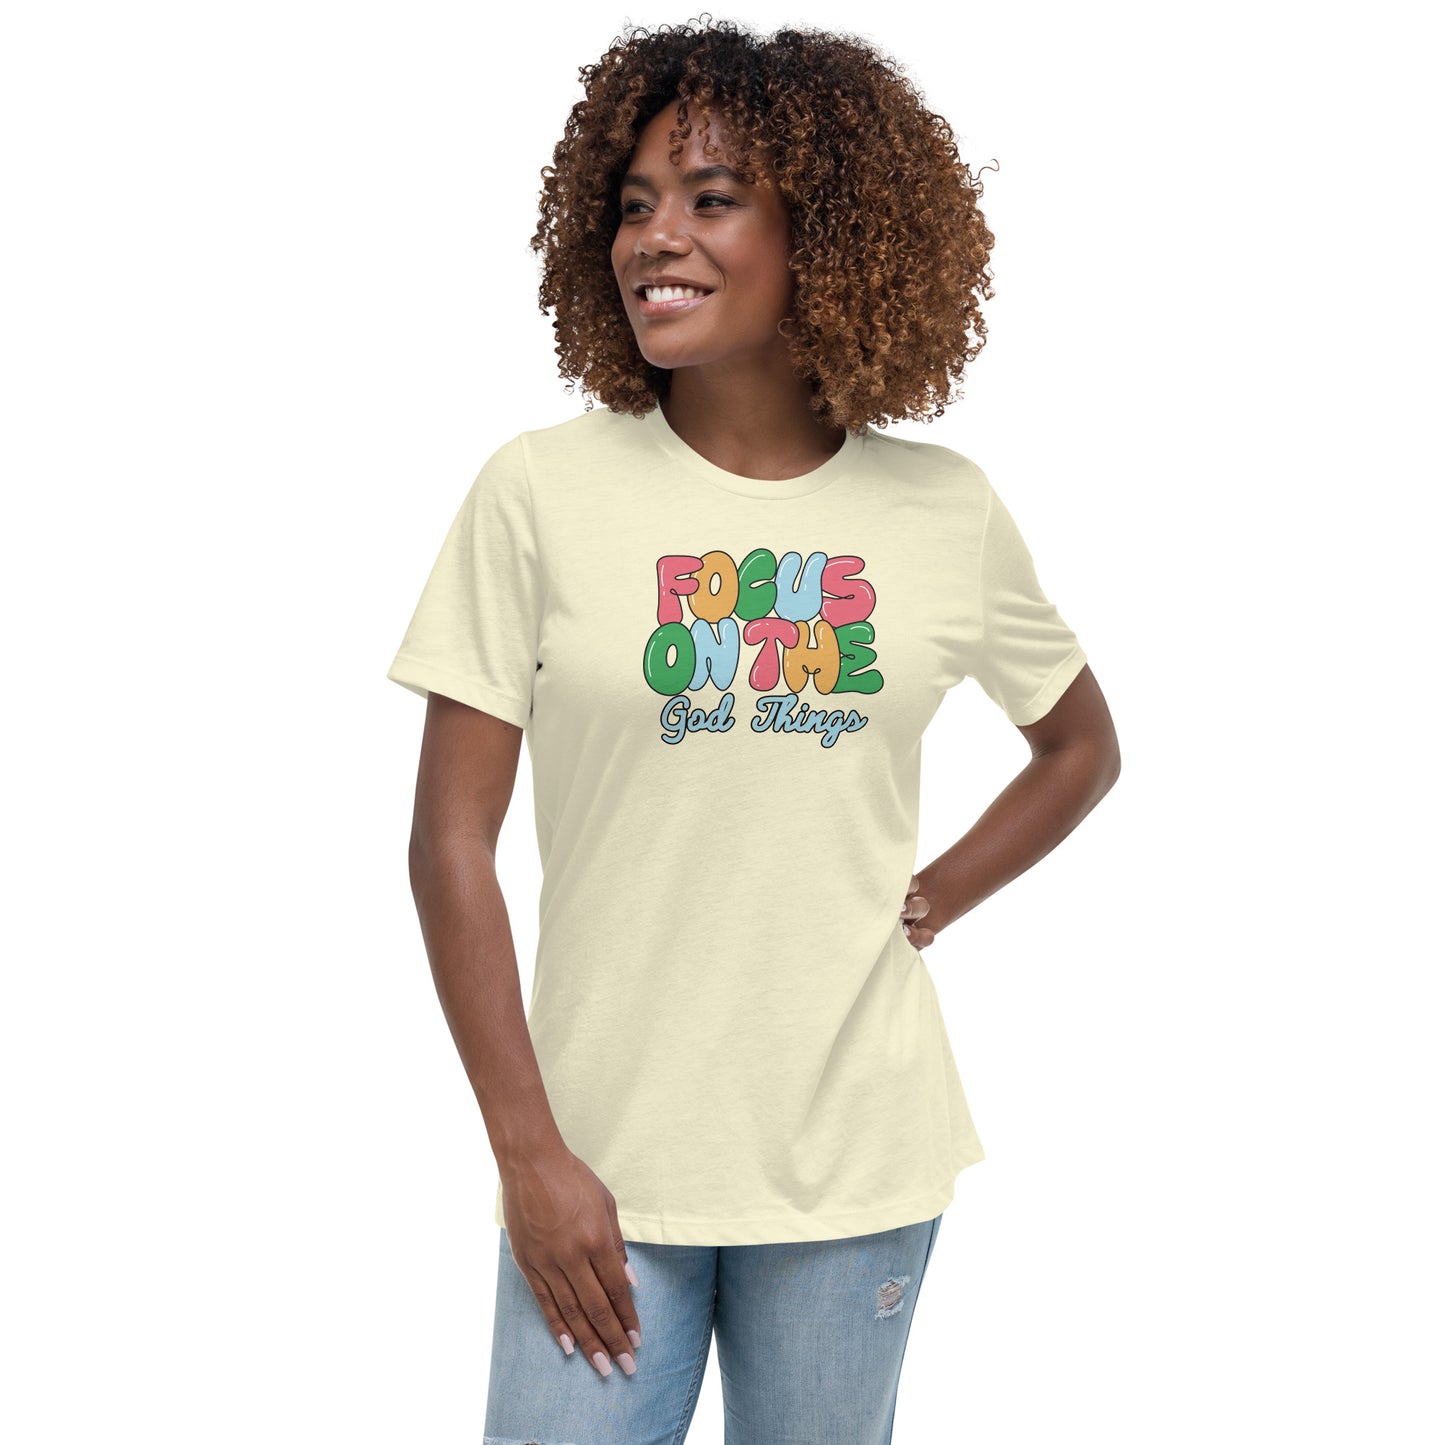 Focus on the God Things Women's Relaxed T-Shirt